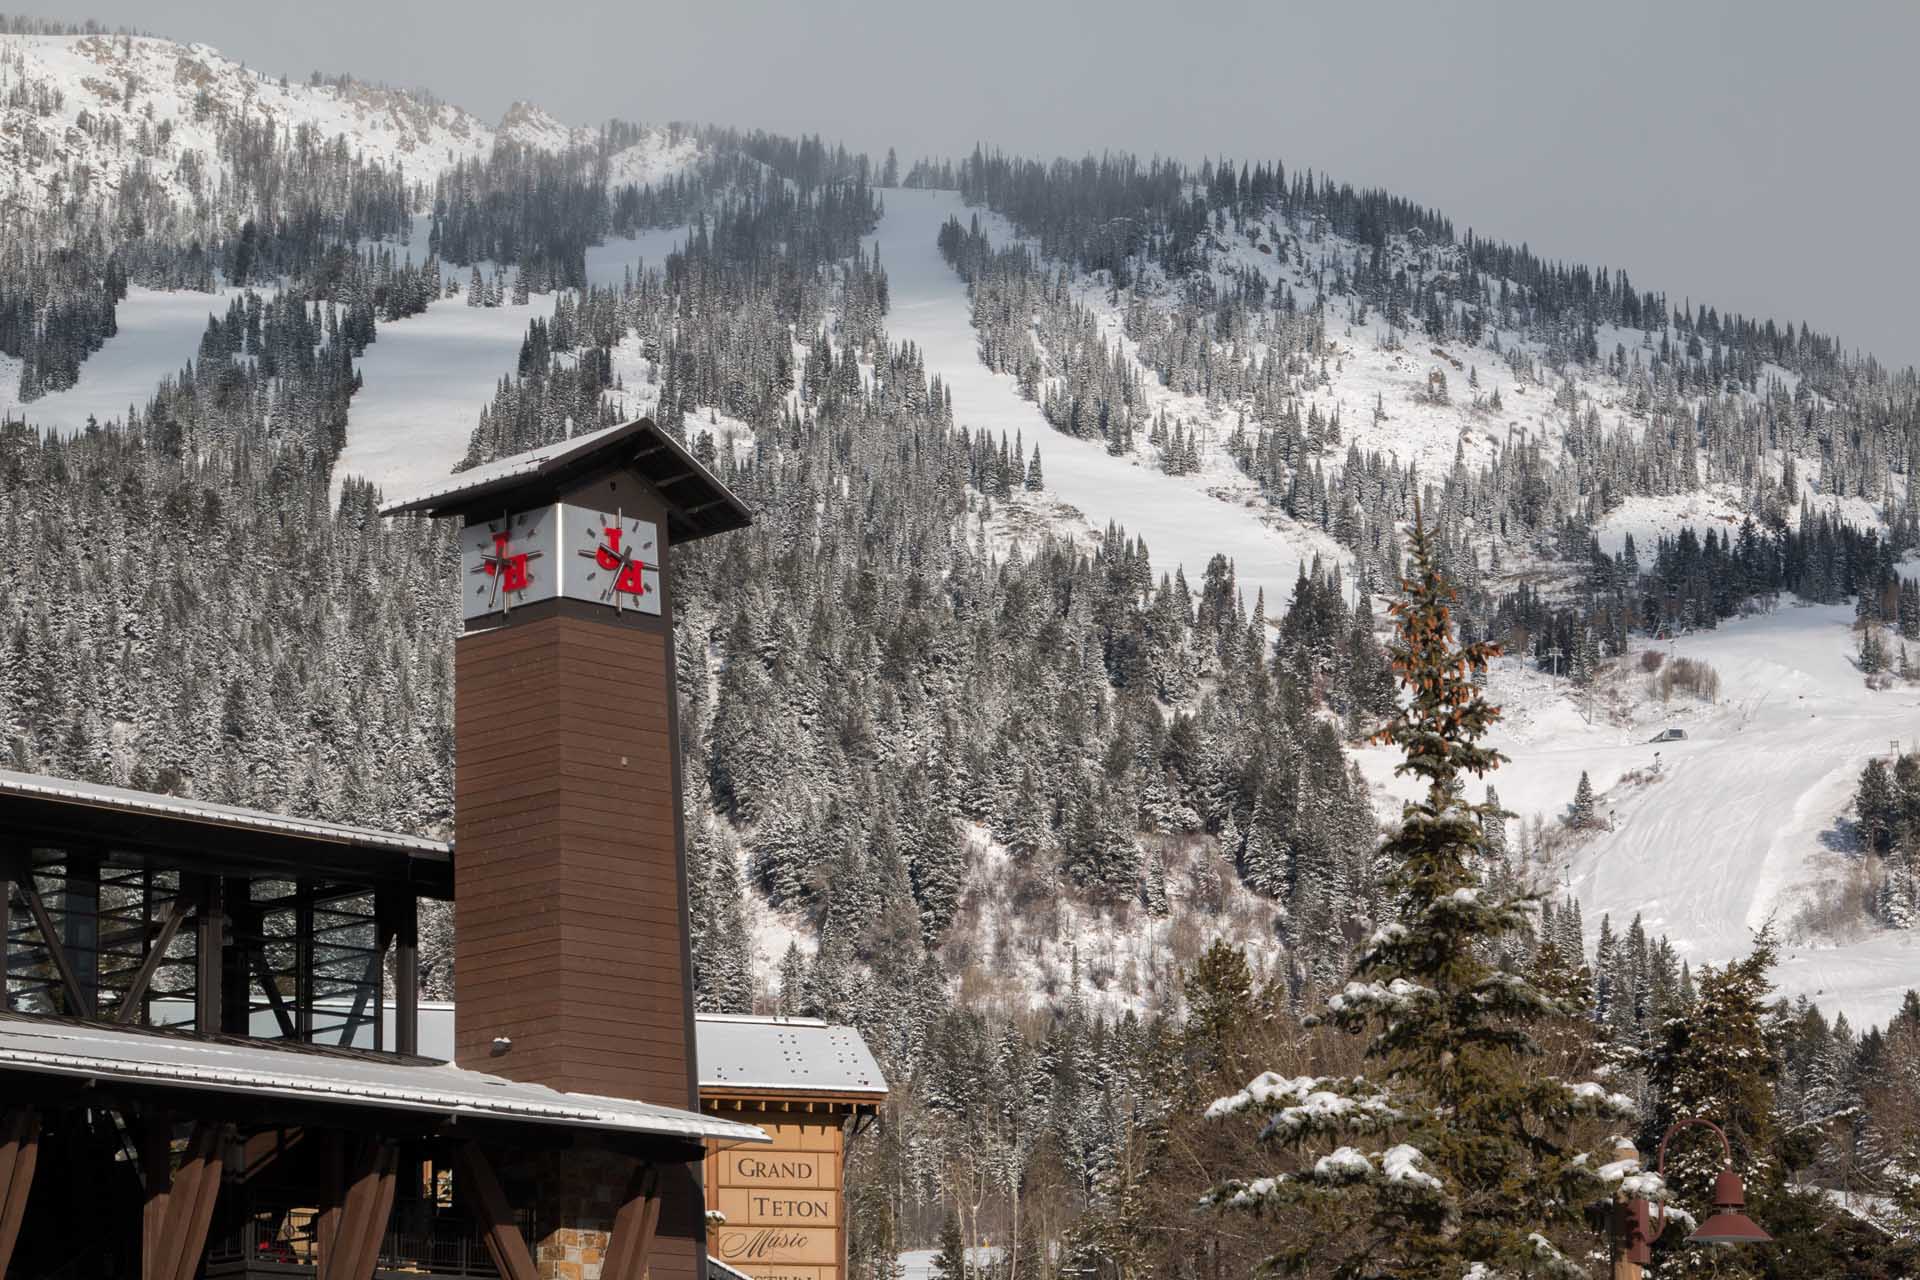 Teton Village is considered the 7th most expensive ski resort in the USA. The most expensive ski resorts in the USA.